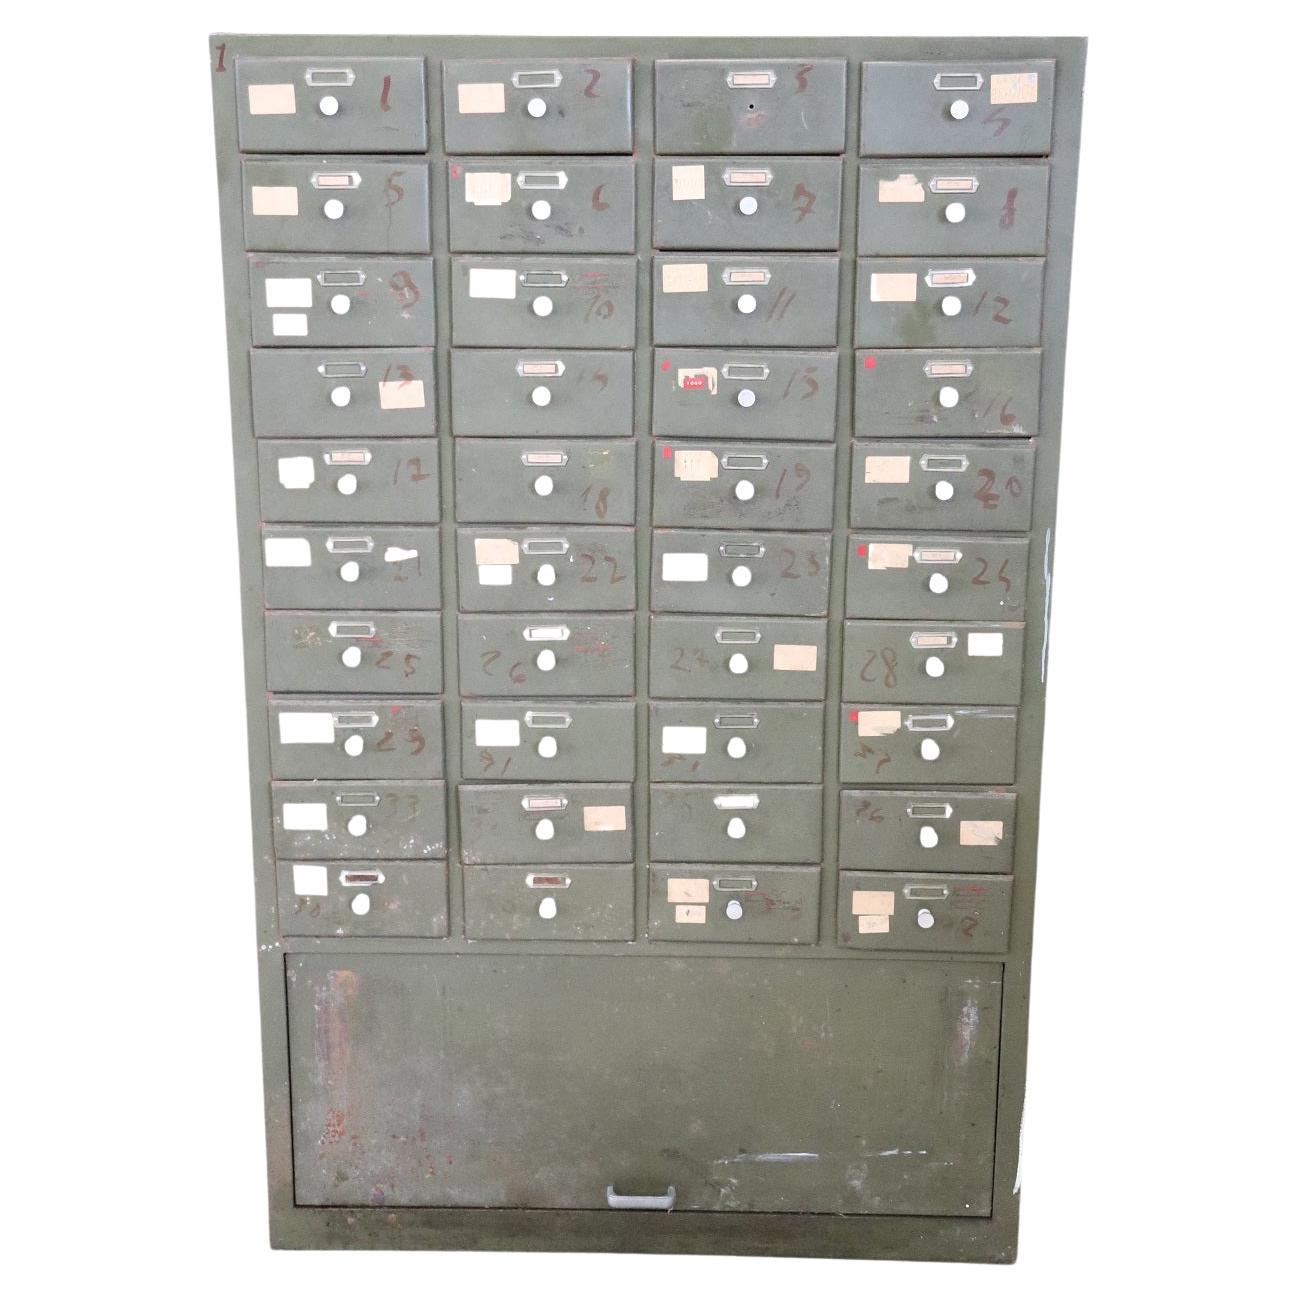 Italian Vintage Industrial Large Apothecary Multi Drawers in Metal